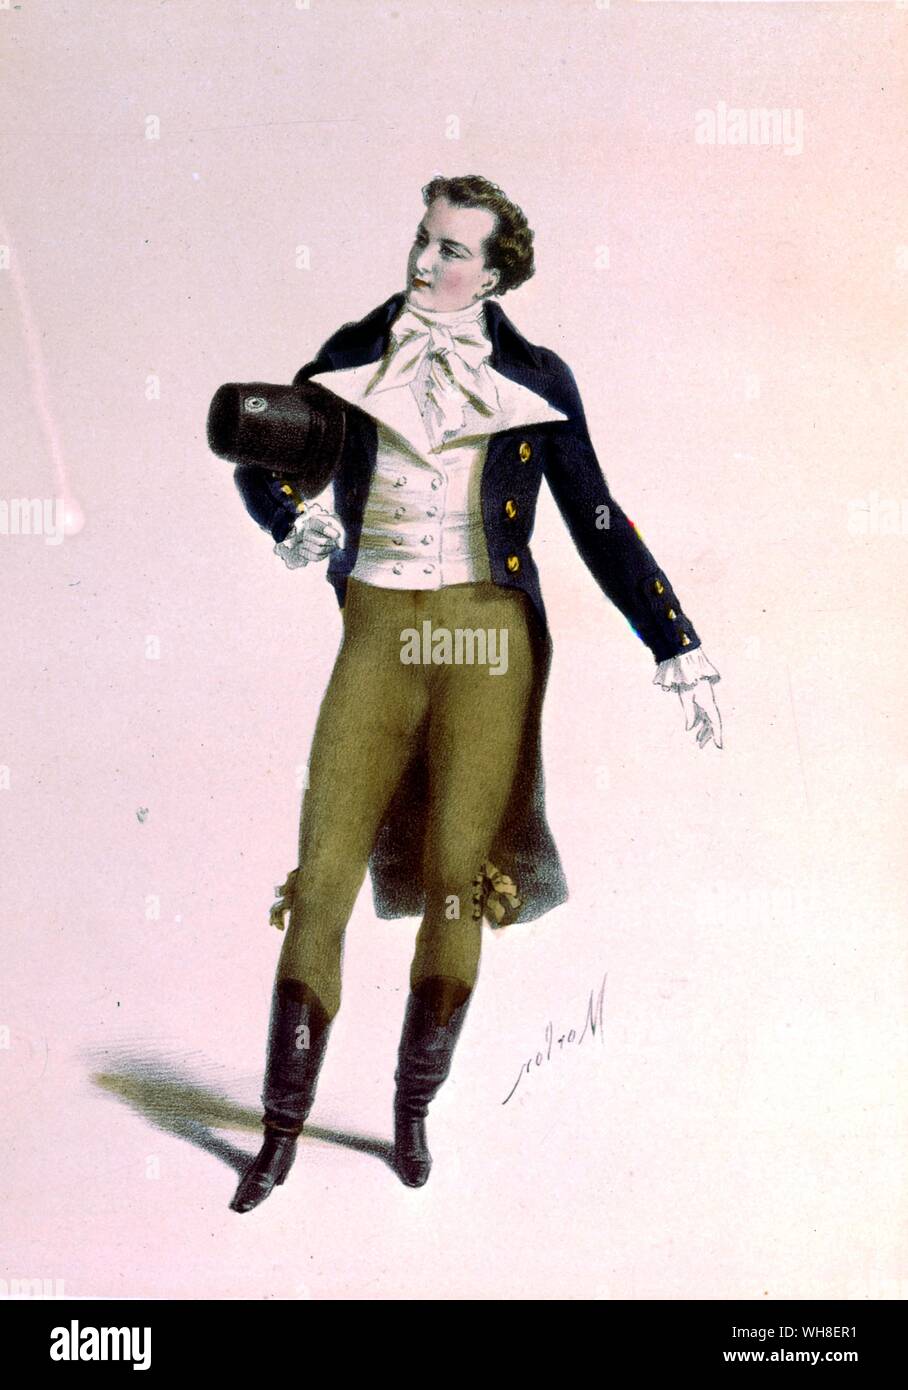 The actor Bressant as Humbert in Le Lion Amoureux (The Lion In love), Costumes des theatres (Costumes of the theatres) 1860. From La Vie Parisienne by Joanna Richardson (1860). Stock Photo